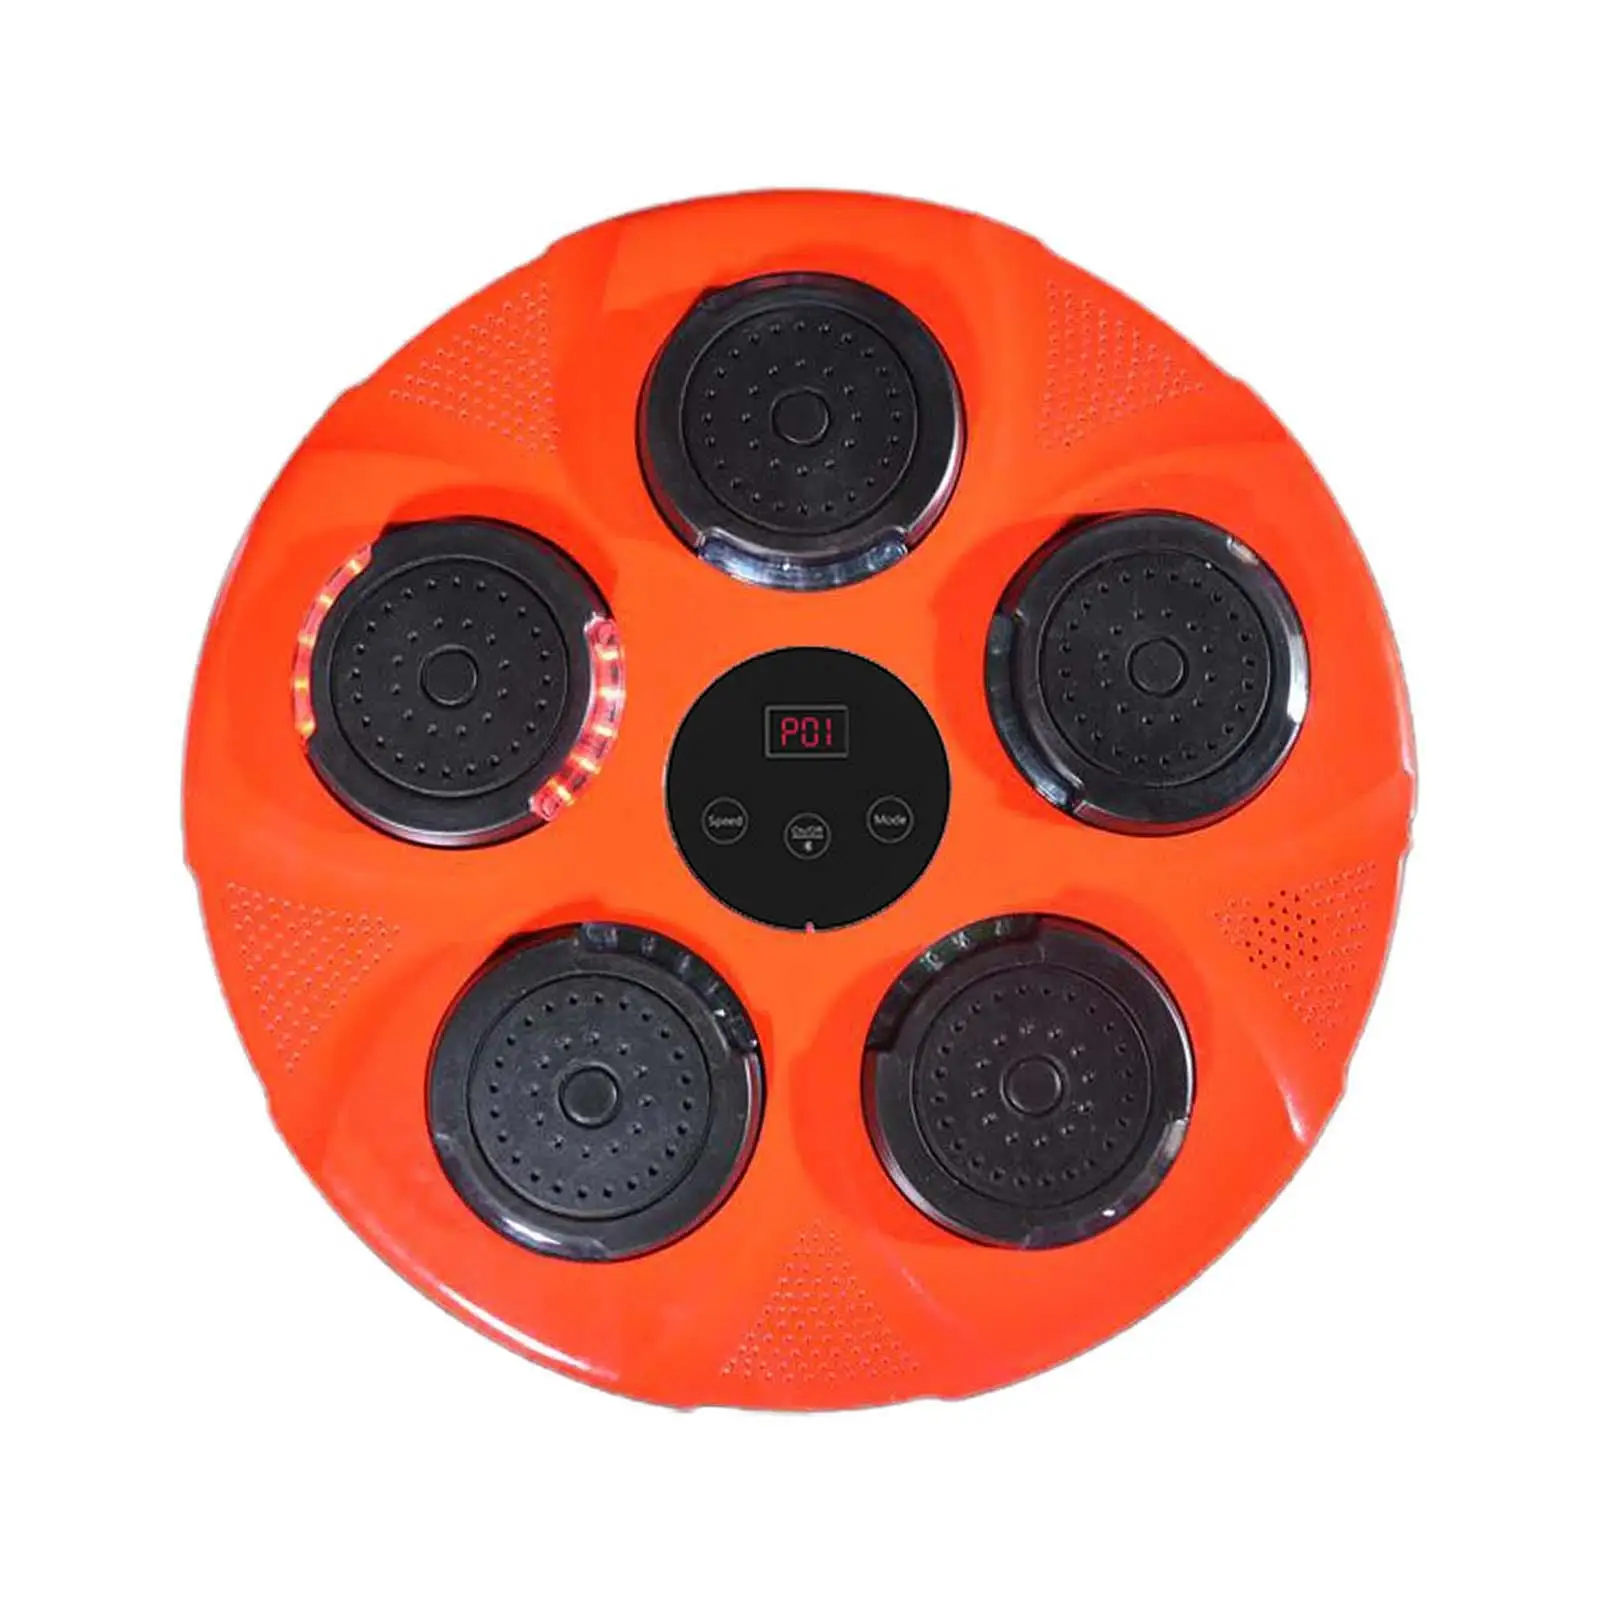 Boxing Machine Training Relaxing Rhythm Wall Target Rechargeable Punching Pad Boxing Trainer for Home Gym Practice Exercise